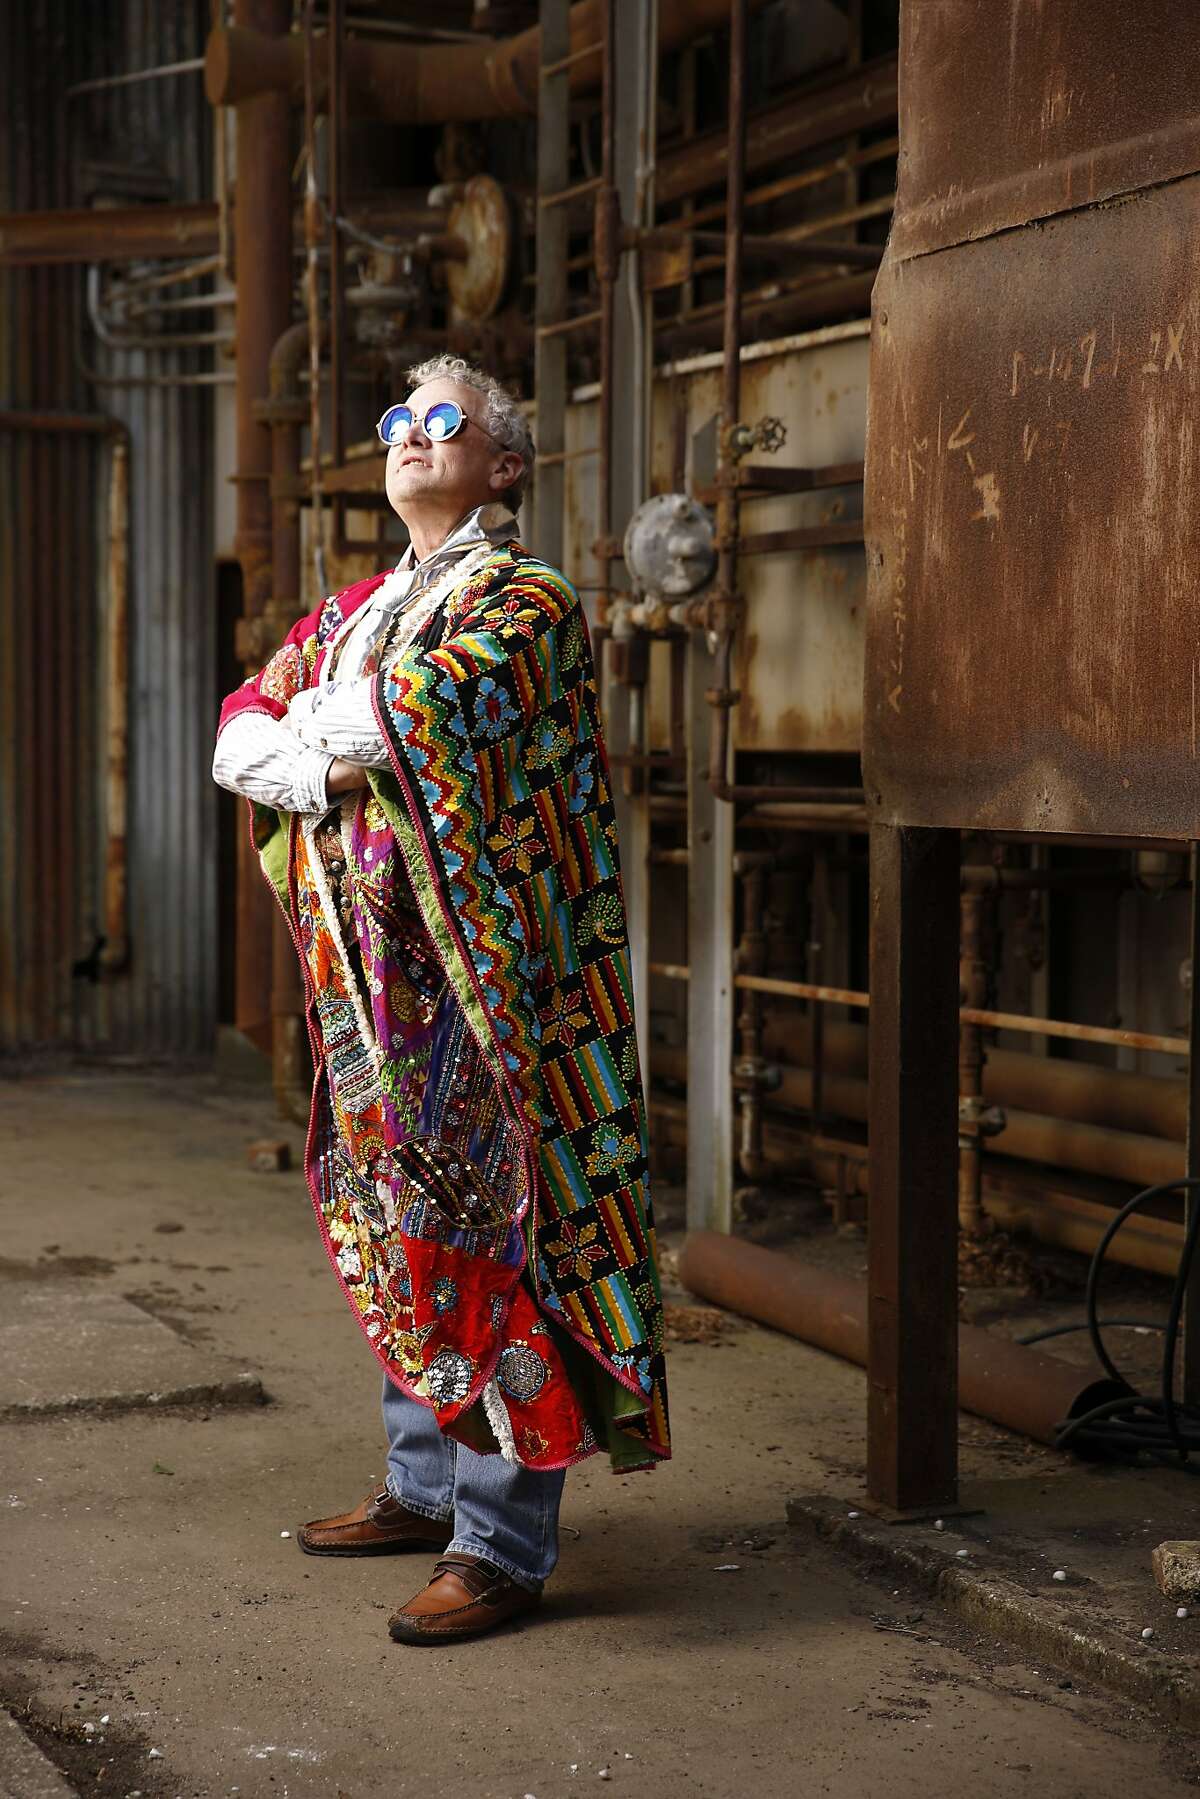 Eric Moeller, 60, a geologist from Inverness, will be attending his ninth Burning Man fest this year. On the playa, he goes by the name, "E," and says his playa style is "cool/kewl," and that it expresses "comfort." Because the festival features a carnival theme, he chose a bejeweled caftan from a designer called Ellko, and a metallic silver tie (not seen) and a vest (not seen) from Distractions on Haight Street. "for me it's about the carnival of mirrors. I'm wearing a tie that is made from a lady's belt, which doesn't need to be a lady's belt." Seen at a Burning Man costumes day-long dance party and Burning Man trunk show at Pier 70, site of an old shipyard now used as a public event space as seen in San Francisco, California, on Saturday, August 1, 2015.